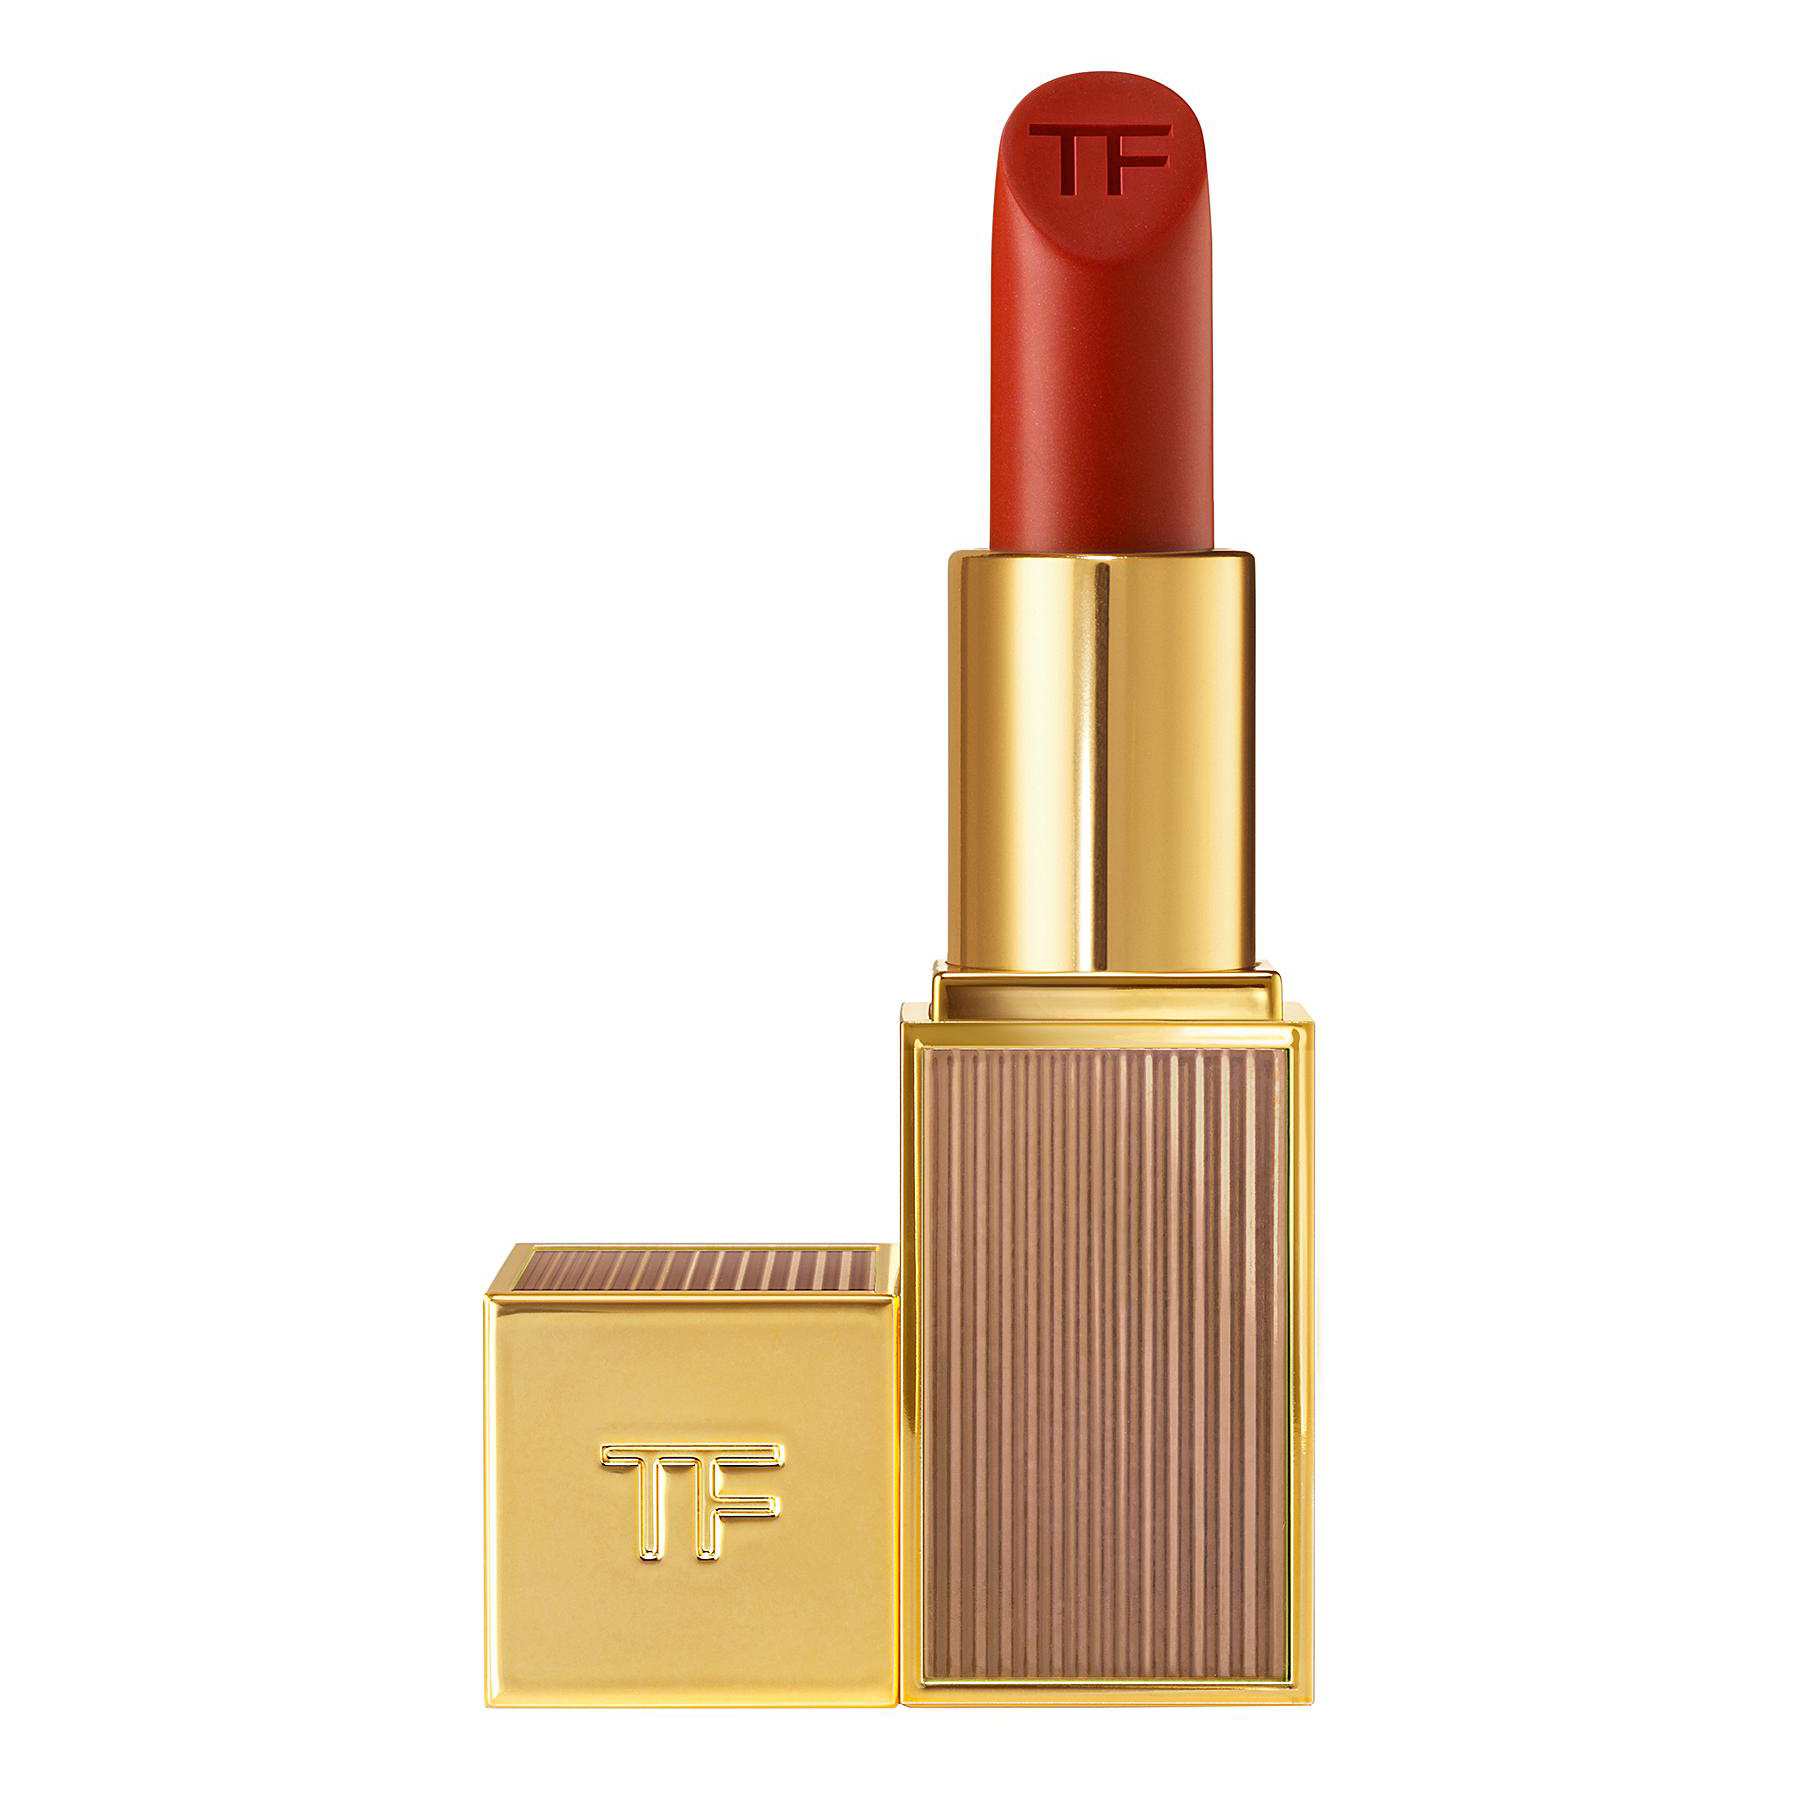 Son Tom Ford (Orchid Soleil) 16 Scarlet Rouge – Limited Edition - Mỹ Phẩm  Hàng Hiệu Pháp - 